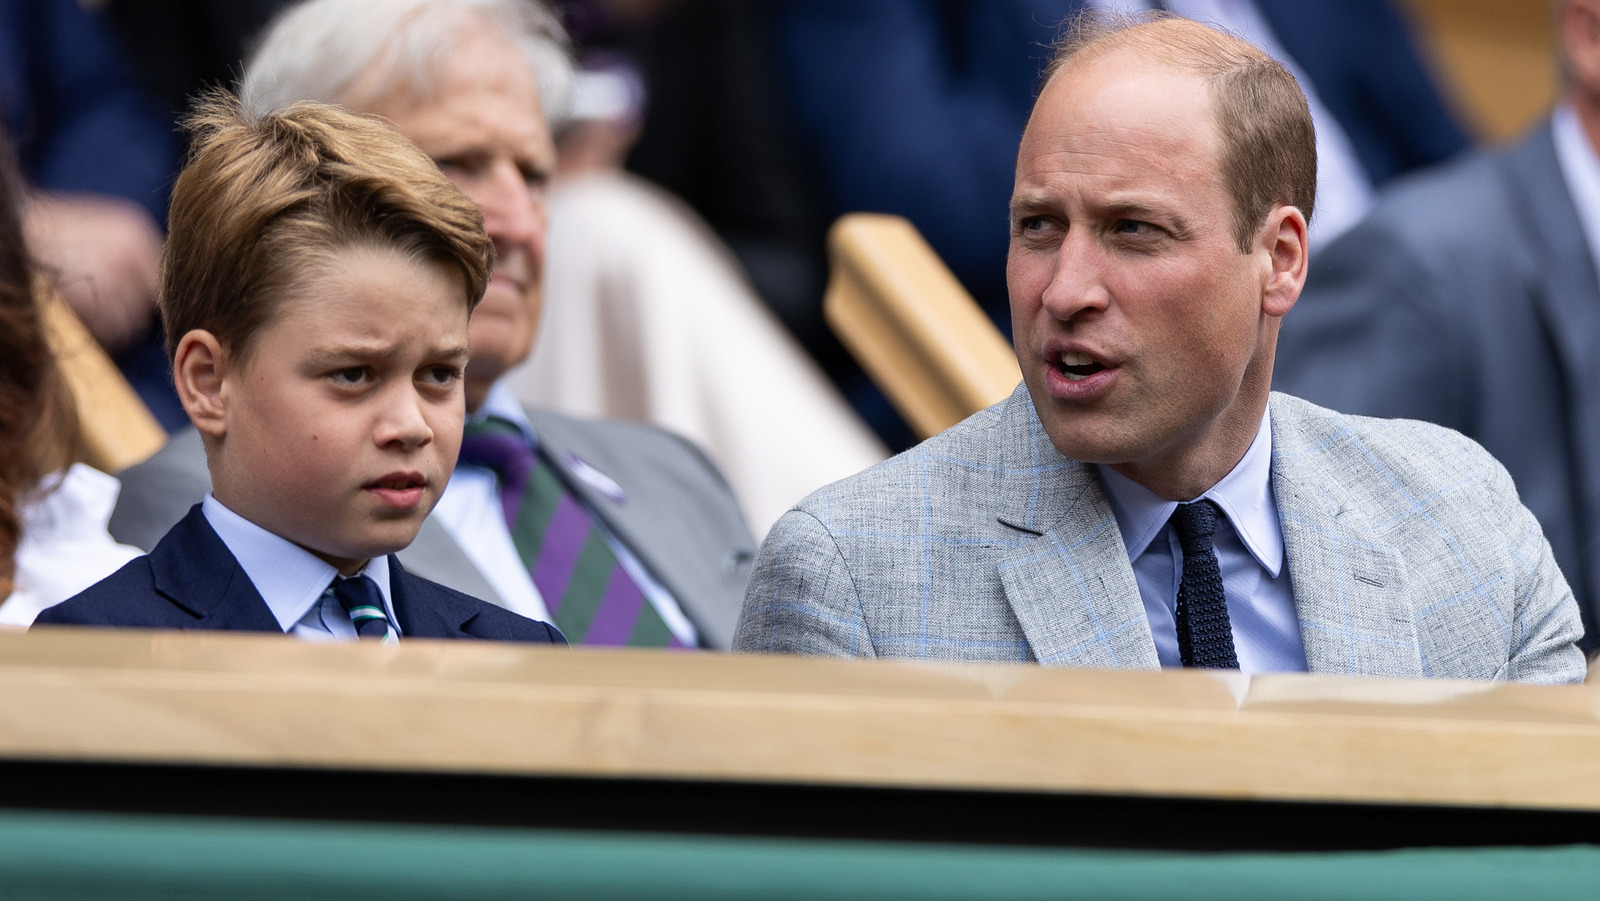 Prince William's Parenting Selections That Left Us Scratching Our Heads